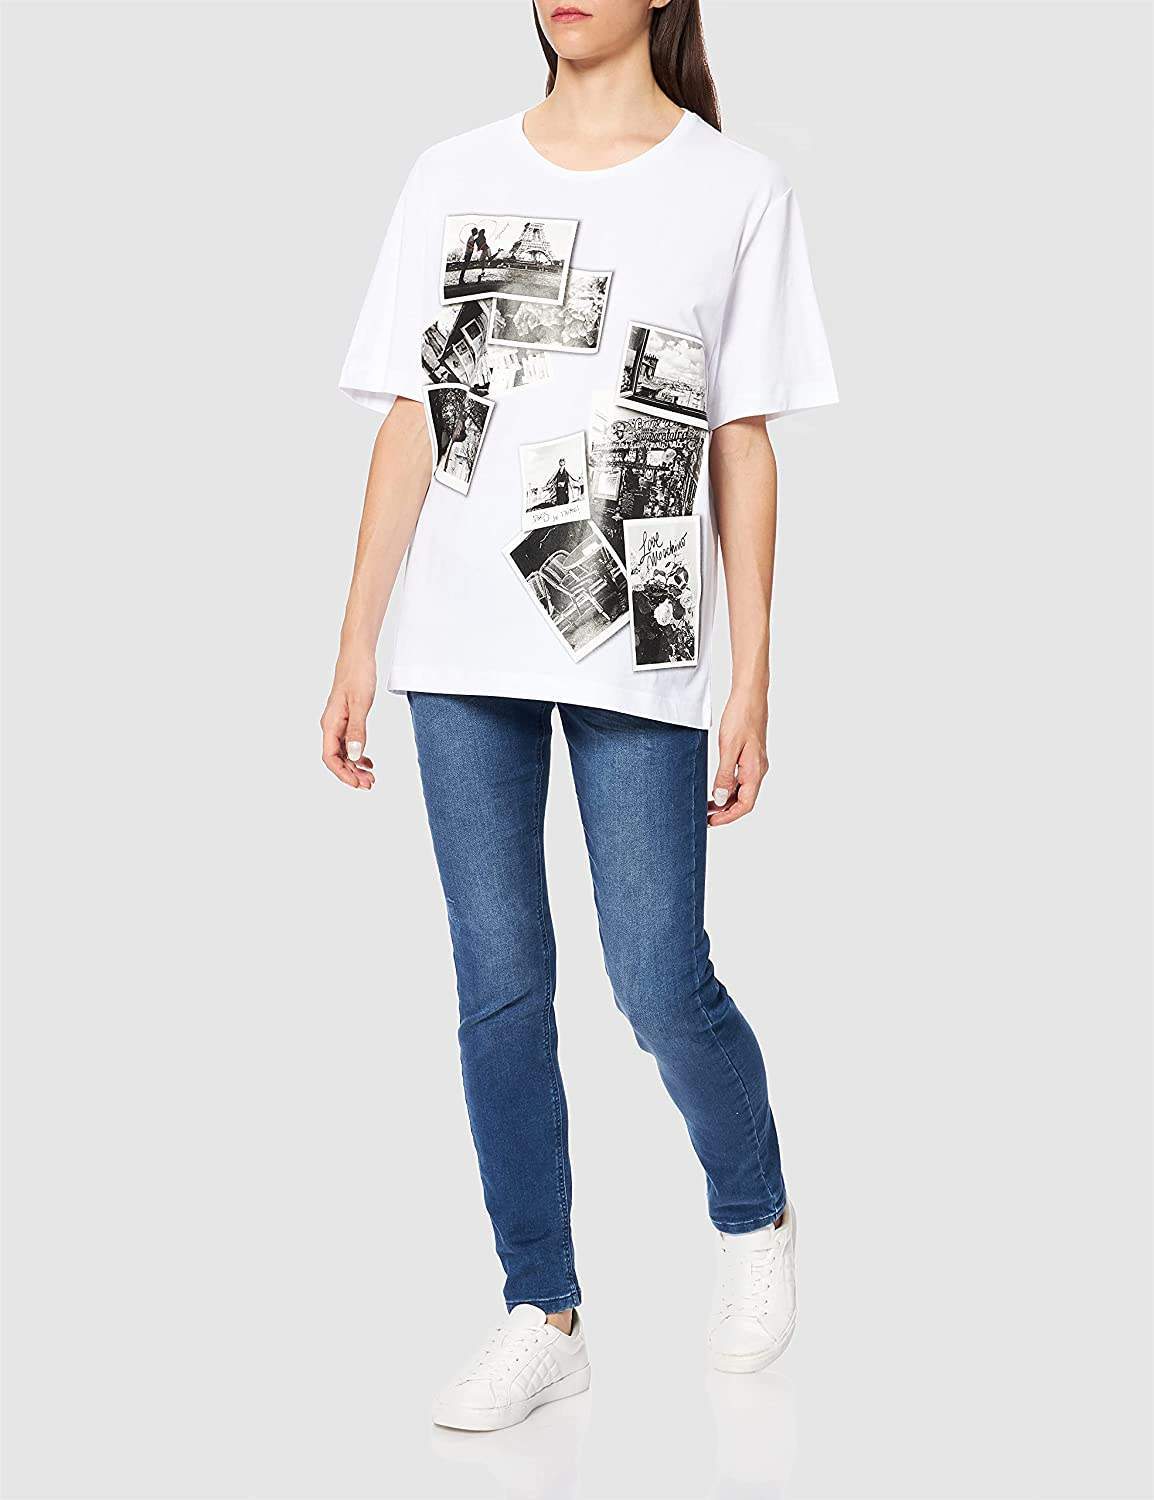 Love Moschino oversized photo printed  Tops & T-Shirt feed-agegroup-adult, feed-color-White, feed-gender-female, IT38|XS, IT40|S, IT42|M, IT44|L, Love Moschino, Tops & T-Shirts - Women - Clothing, White at SEYMAYKA